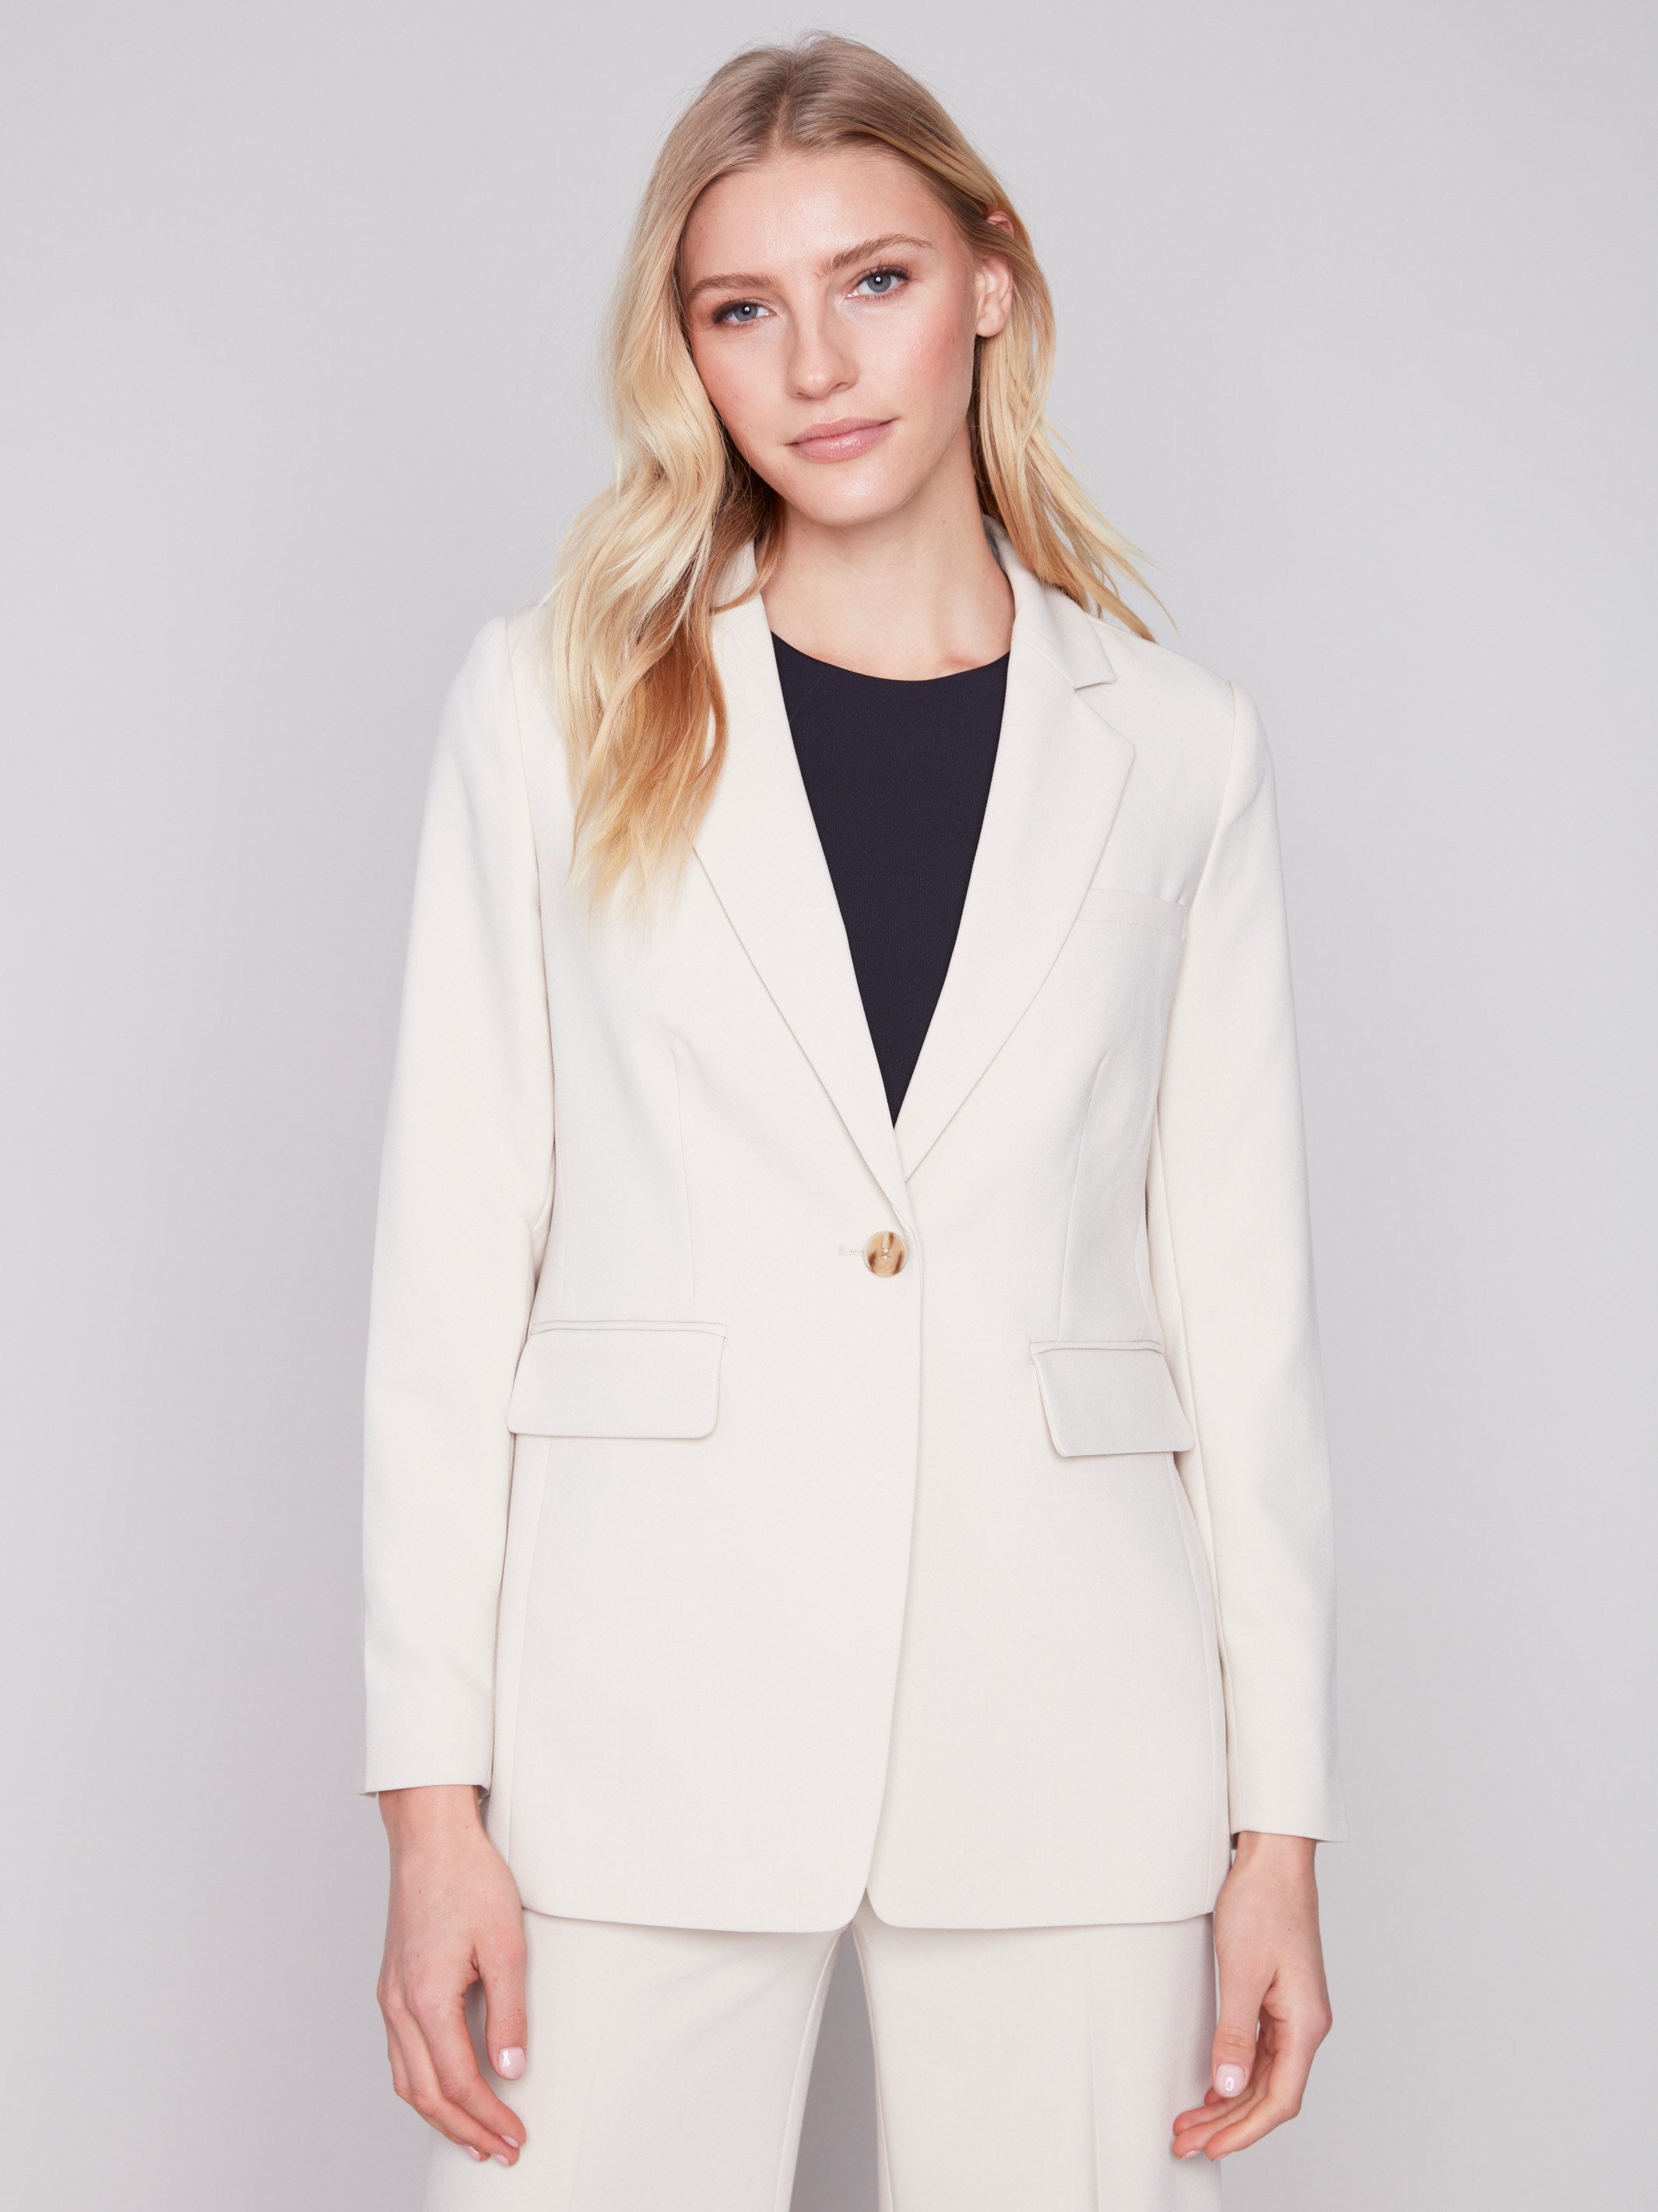 Blazer with Ruched Back - Beige - Charlie B Collection Canada - Image 4